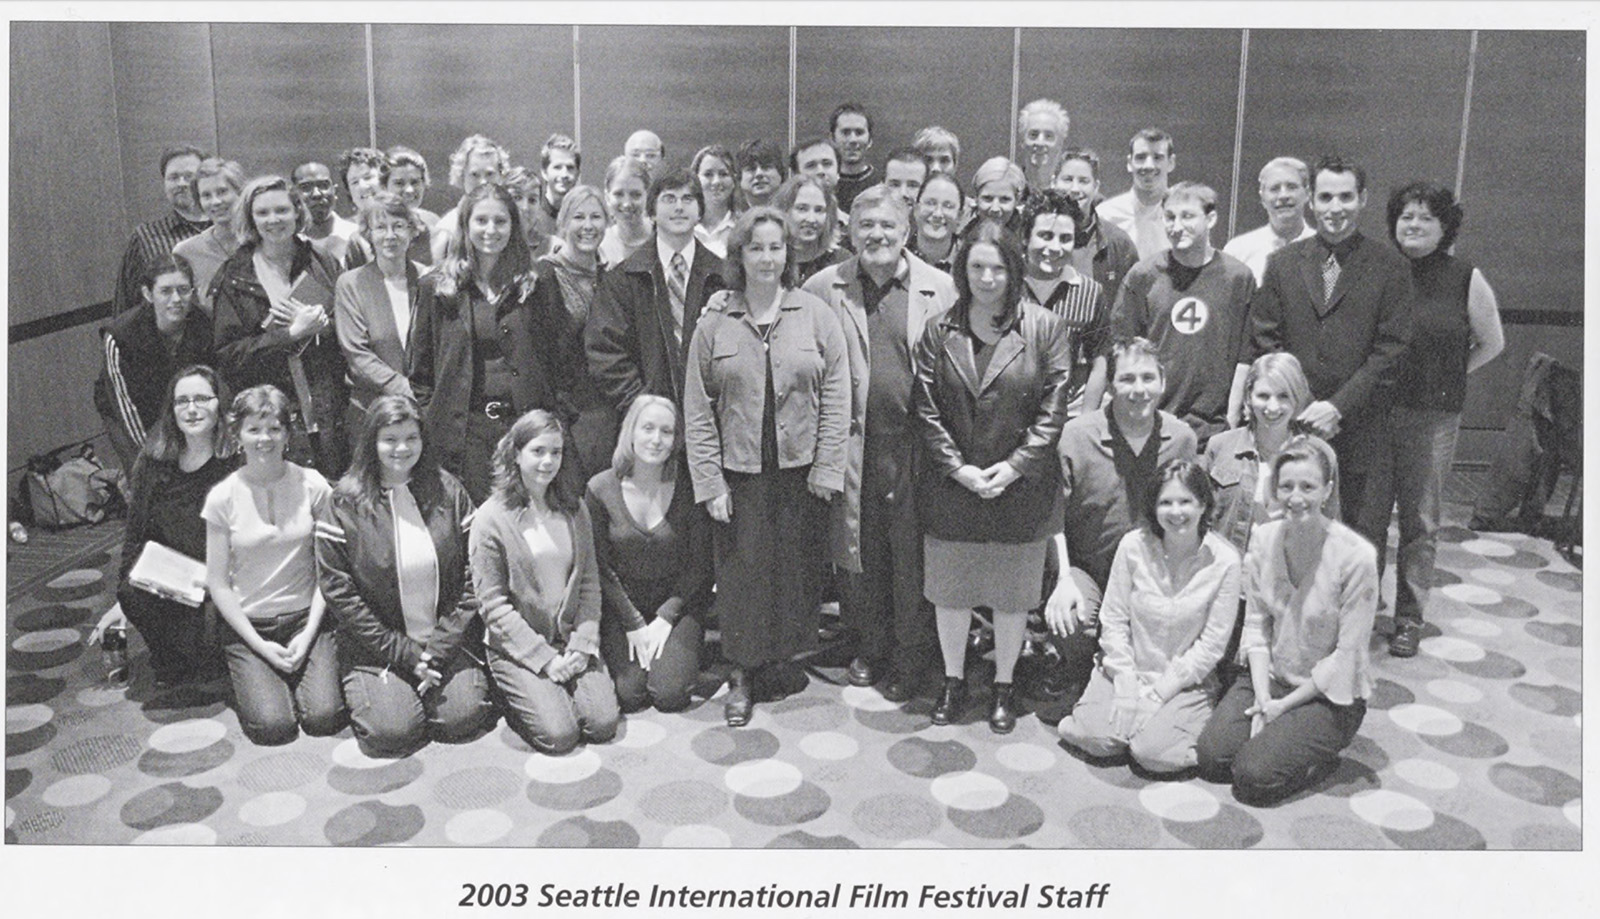 SIFF staff, including long-time programmers, Dan Doody (first year as a shorts programmer), Maryna Ajaja, and festival founder, Darryl Macdonald, not pictured is Beth Barrett, current Artistic Director, who served as copy editor in 2003